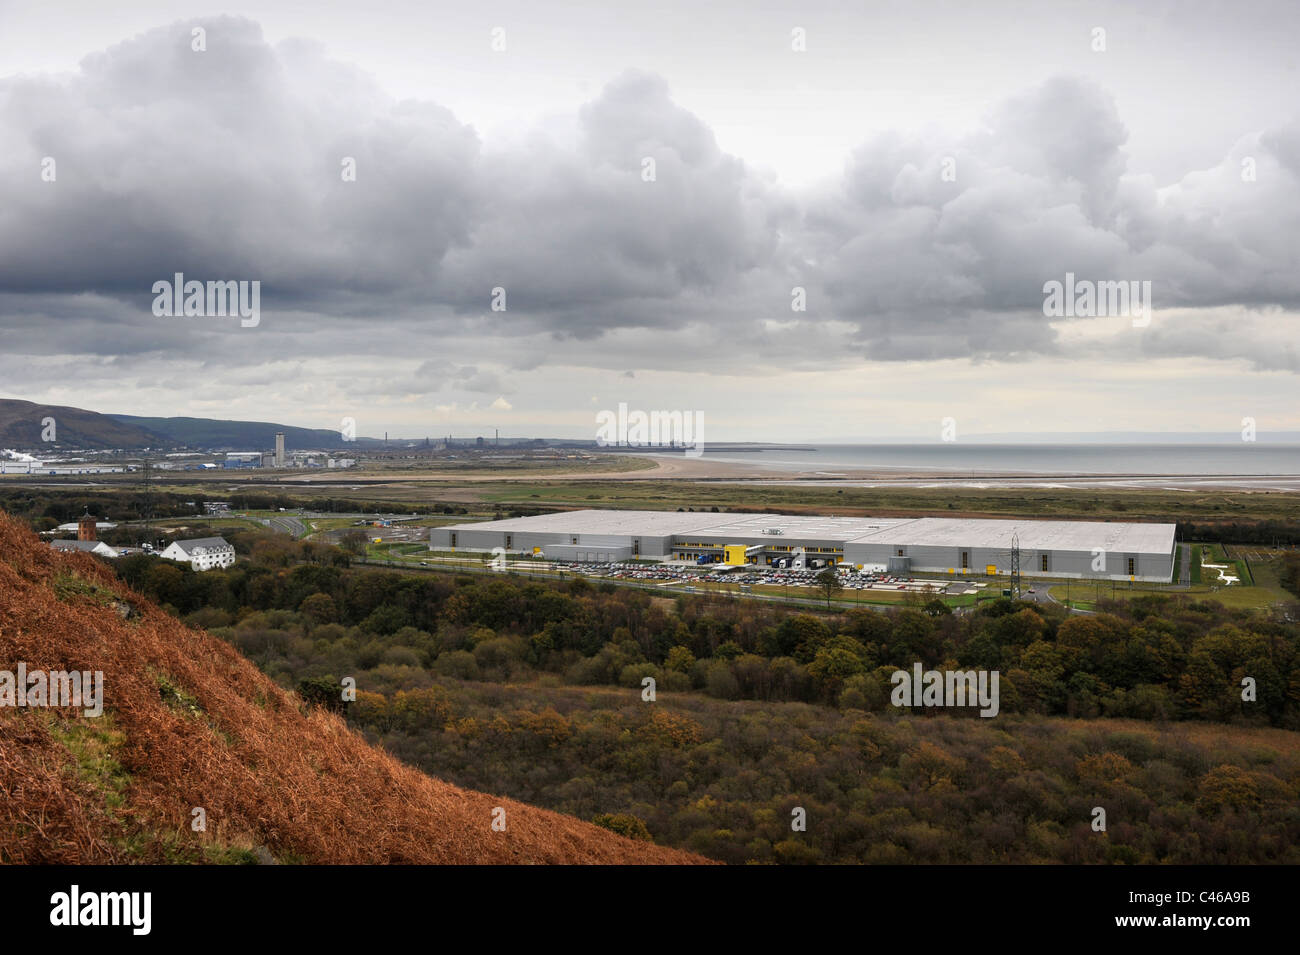 General view of the online retailer Amazon's distribution centre in Swansea, South Wales Stock Photo